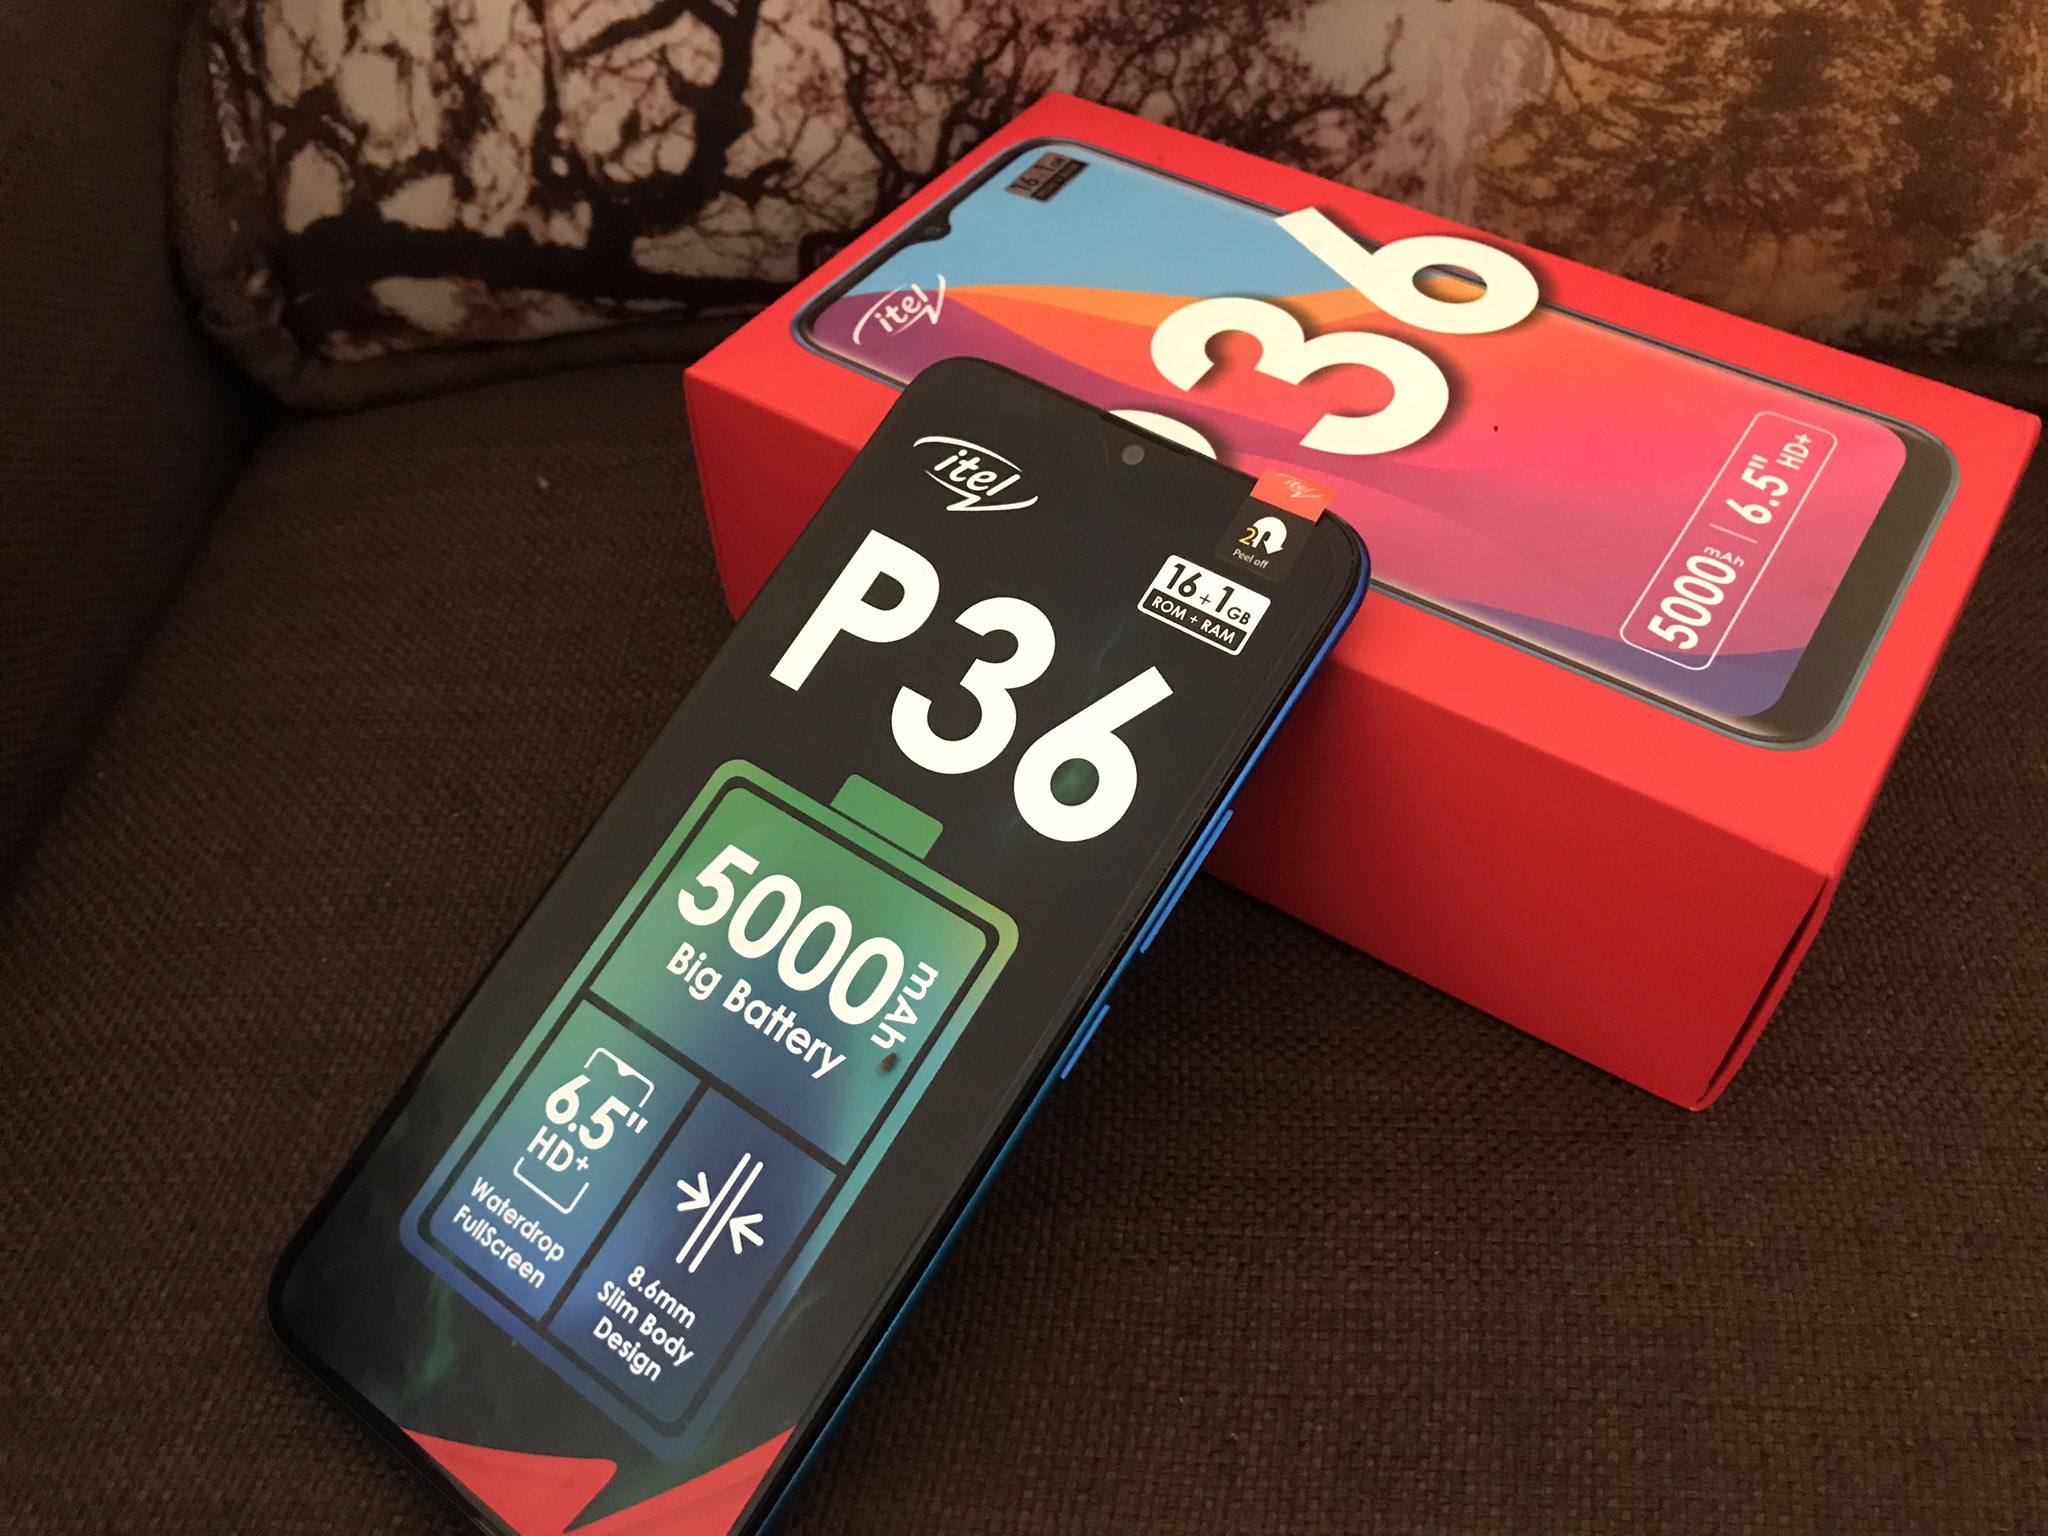 Unboxing the itel P36; Beautiful Design that Doesn’t Attract Fingerprints